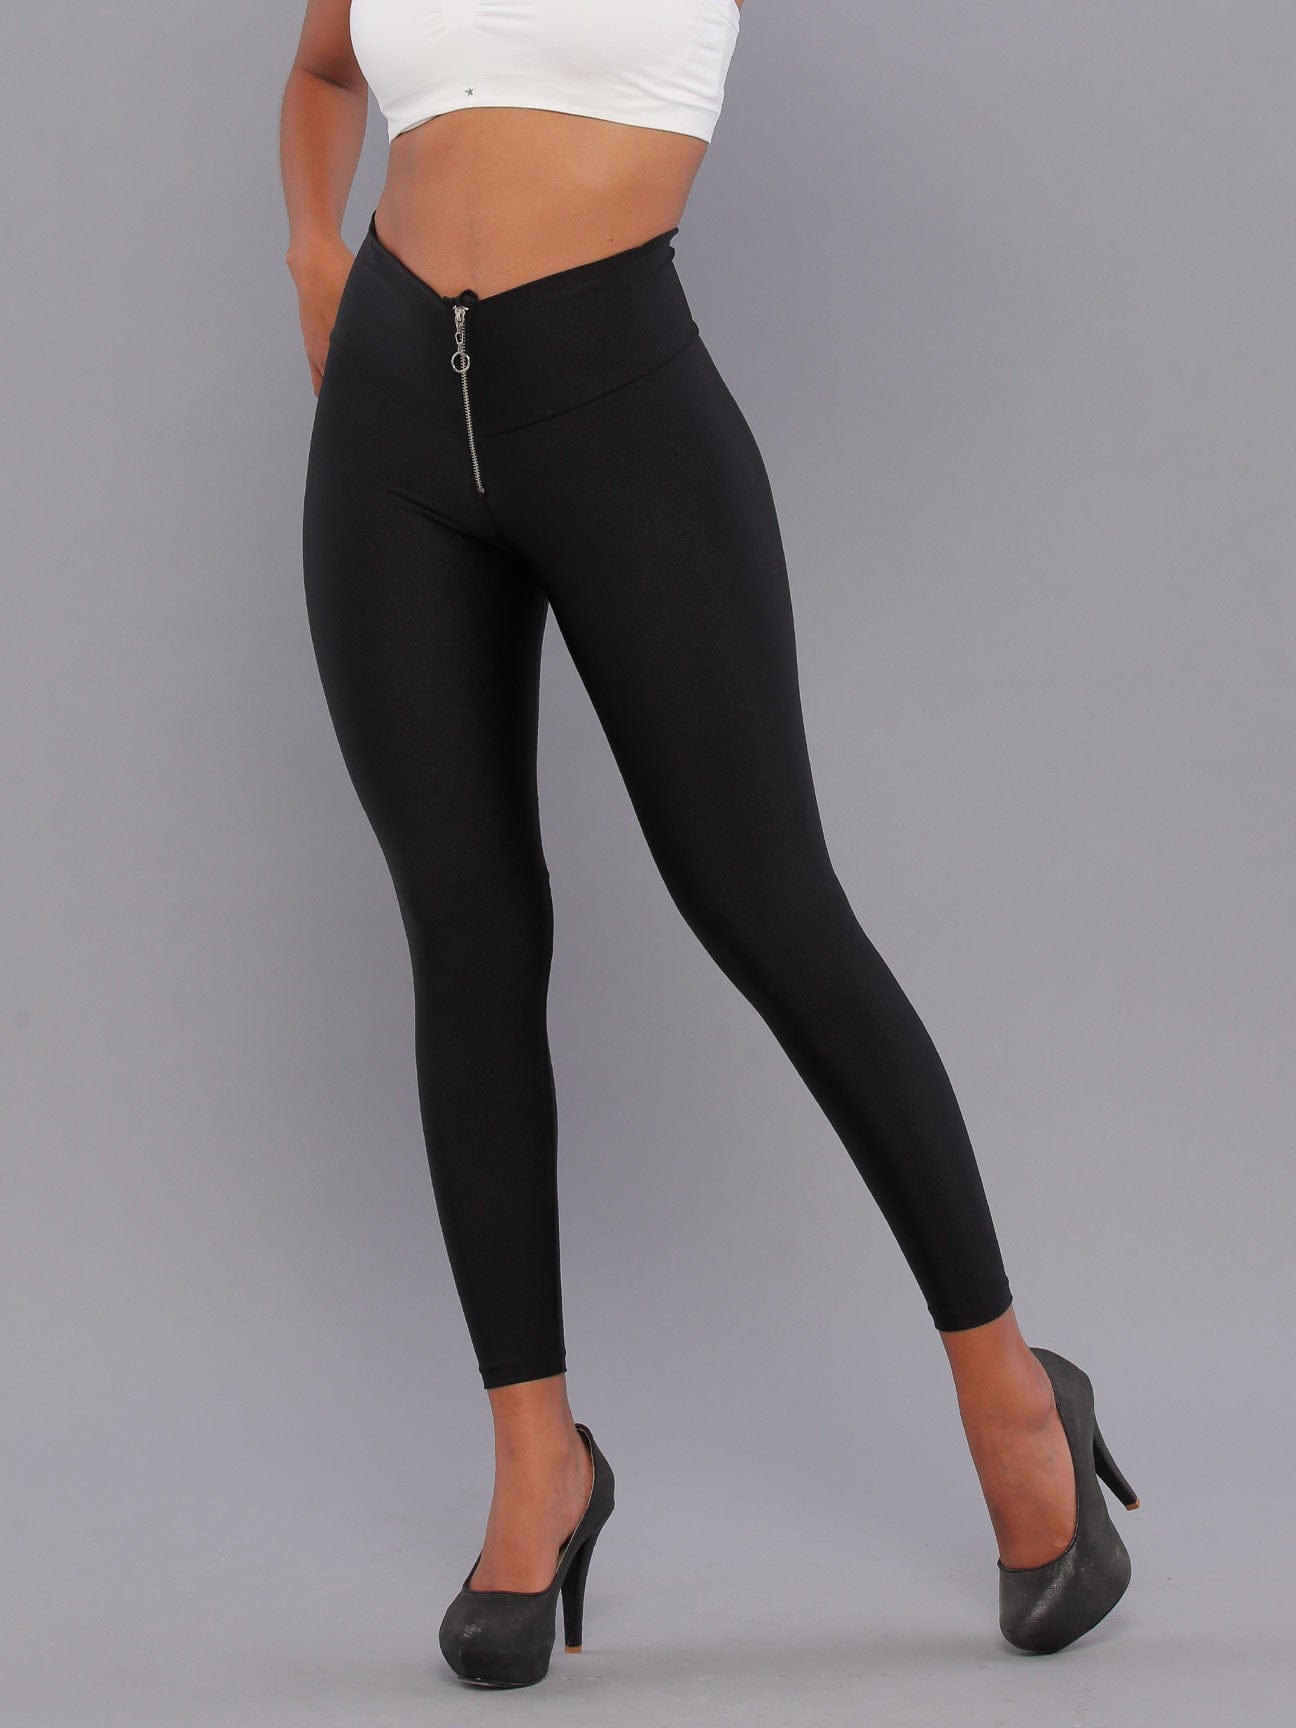 Lady Luck Butt Lift Leggings with Tummy Control 1281